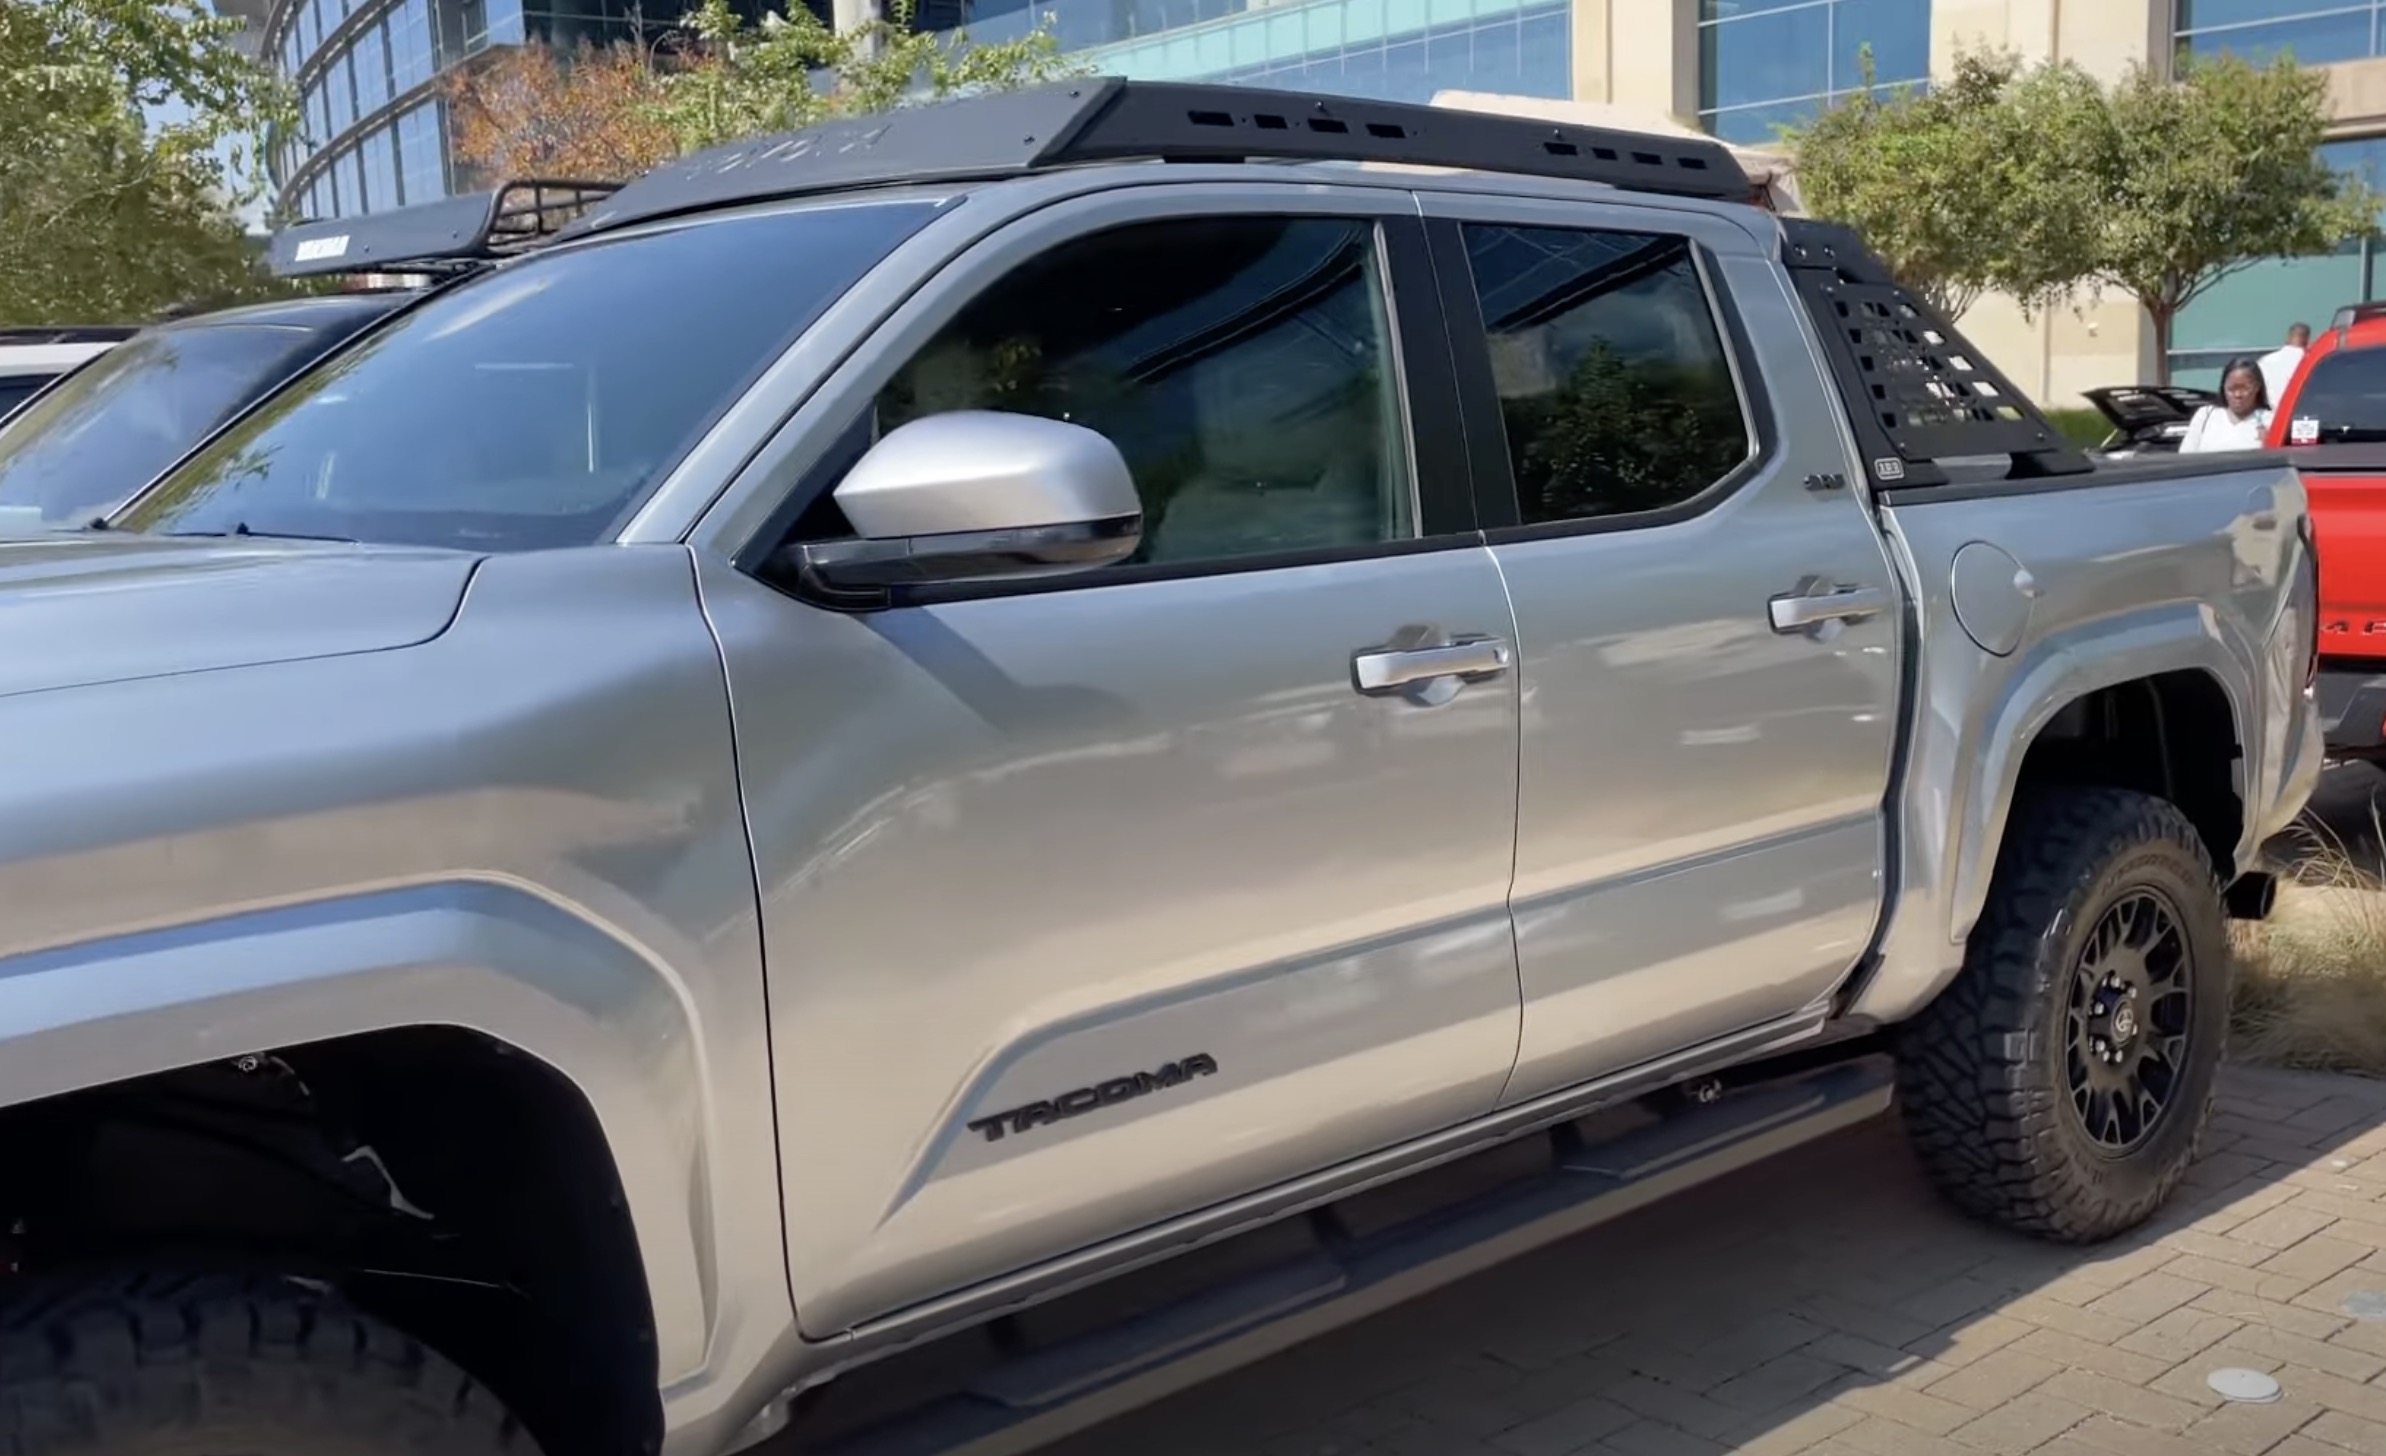 2024 Tacoma 2024 Tacoma SR5 - Specs, Price, MPG, Options/Packages, Features & Photos Celestial Silver 2024 Tacom SR5 TRD Lift Kit 2.5 2.0 inches springs struts build 4